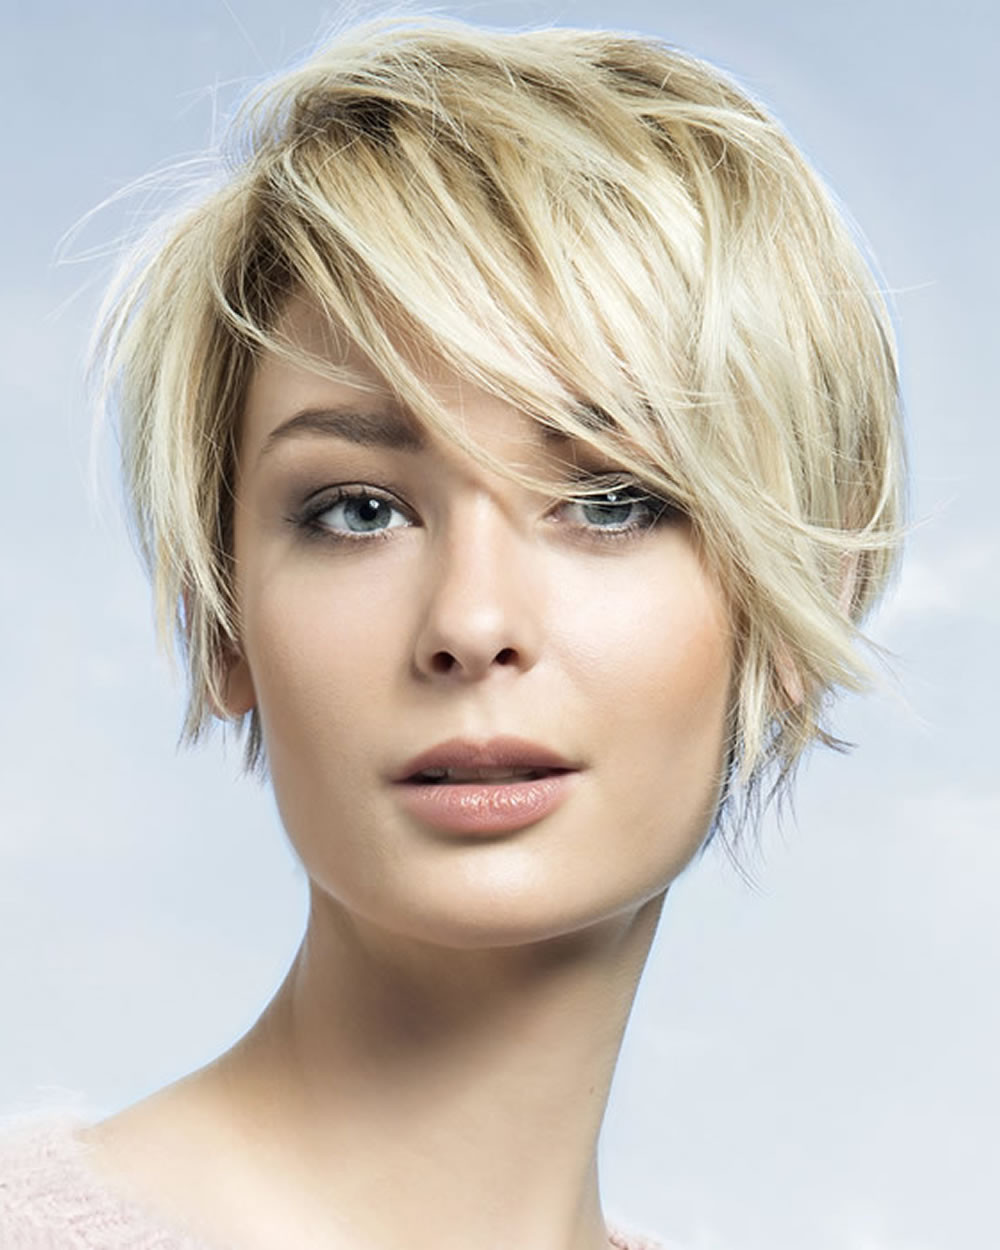 Hairstyles 2019 Female
 Latest Short Haircuts for Women Curly Wavy Straight